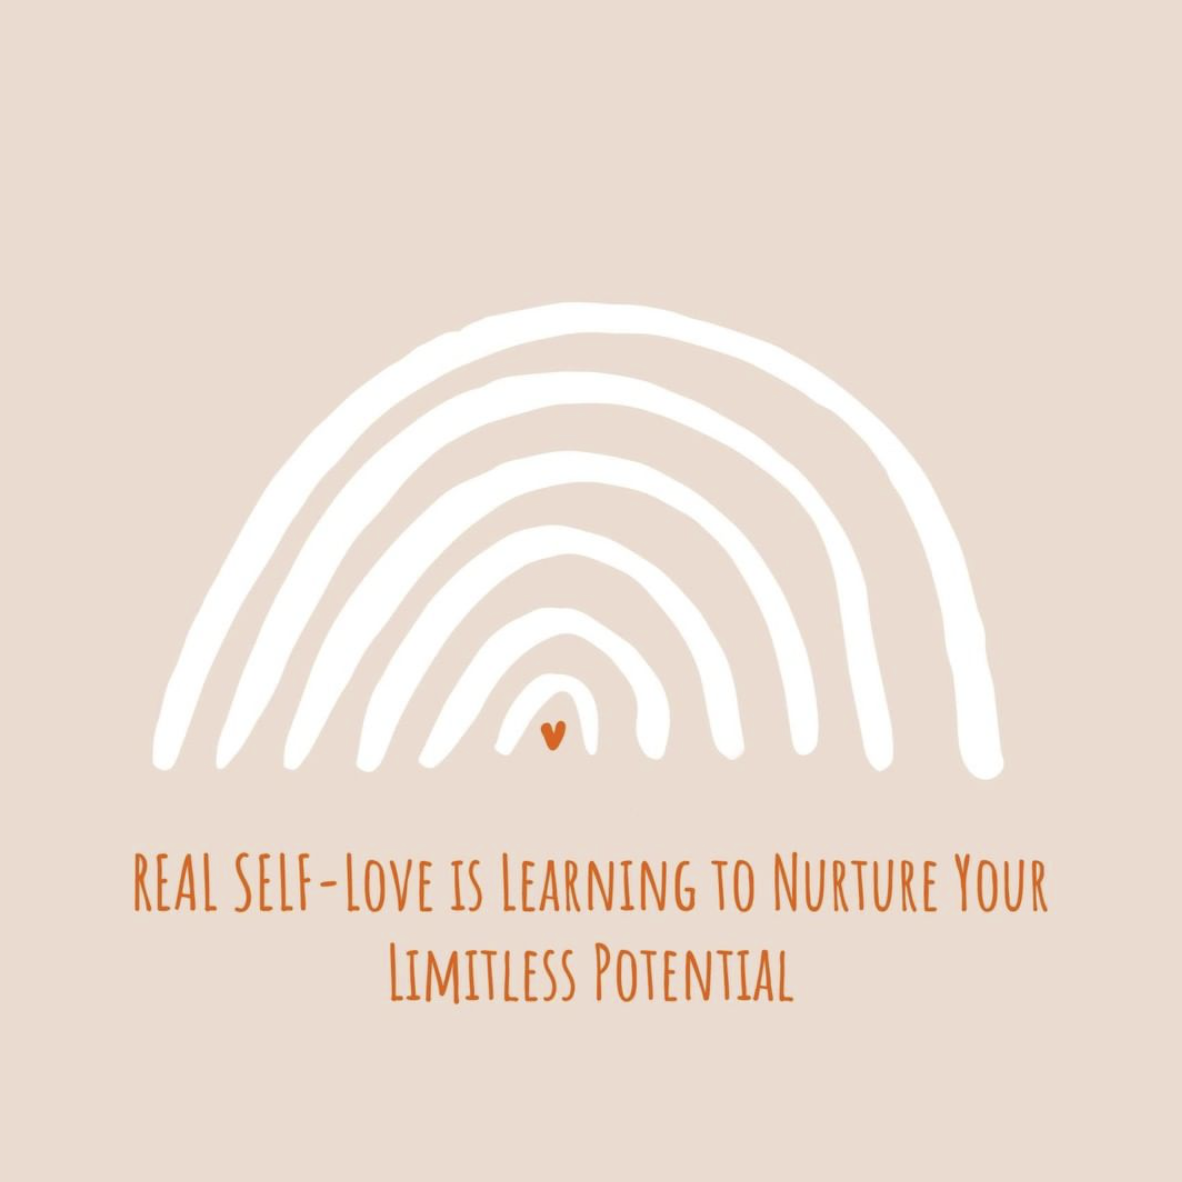 Real self-love isn't about pampering yourself because that's not the way to bring about radical transformation. Real self-love is about recognizing your limitless potential - for love, joy, wisdom, happiness - and nurturing that. The more you develop this kind of self-love, the better your life will become. Guaranteed!